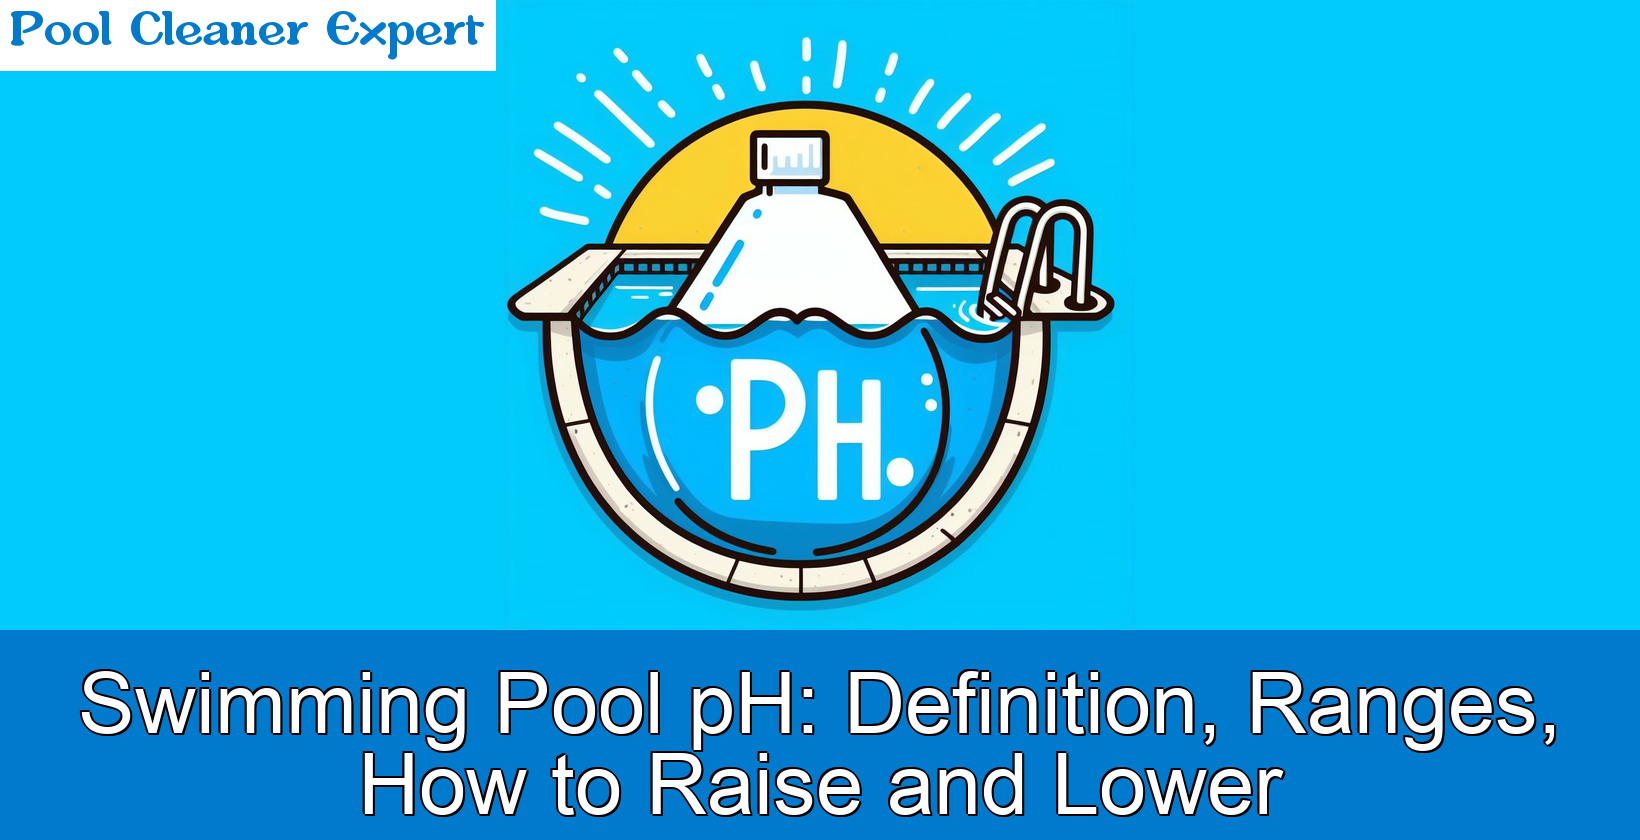 Swimming Pool pH: Definition, Ranges, How to Raise and Lower